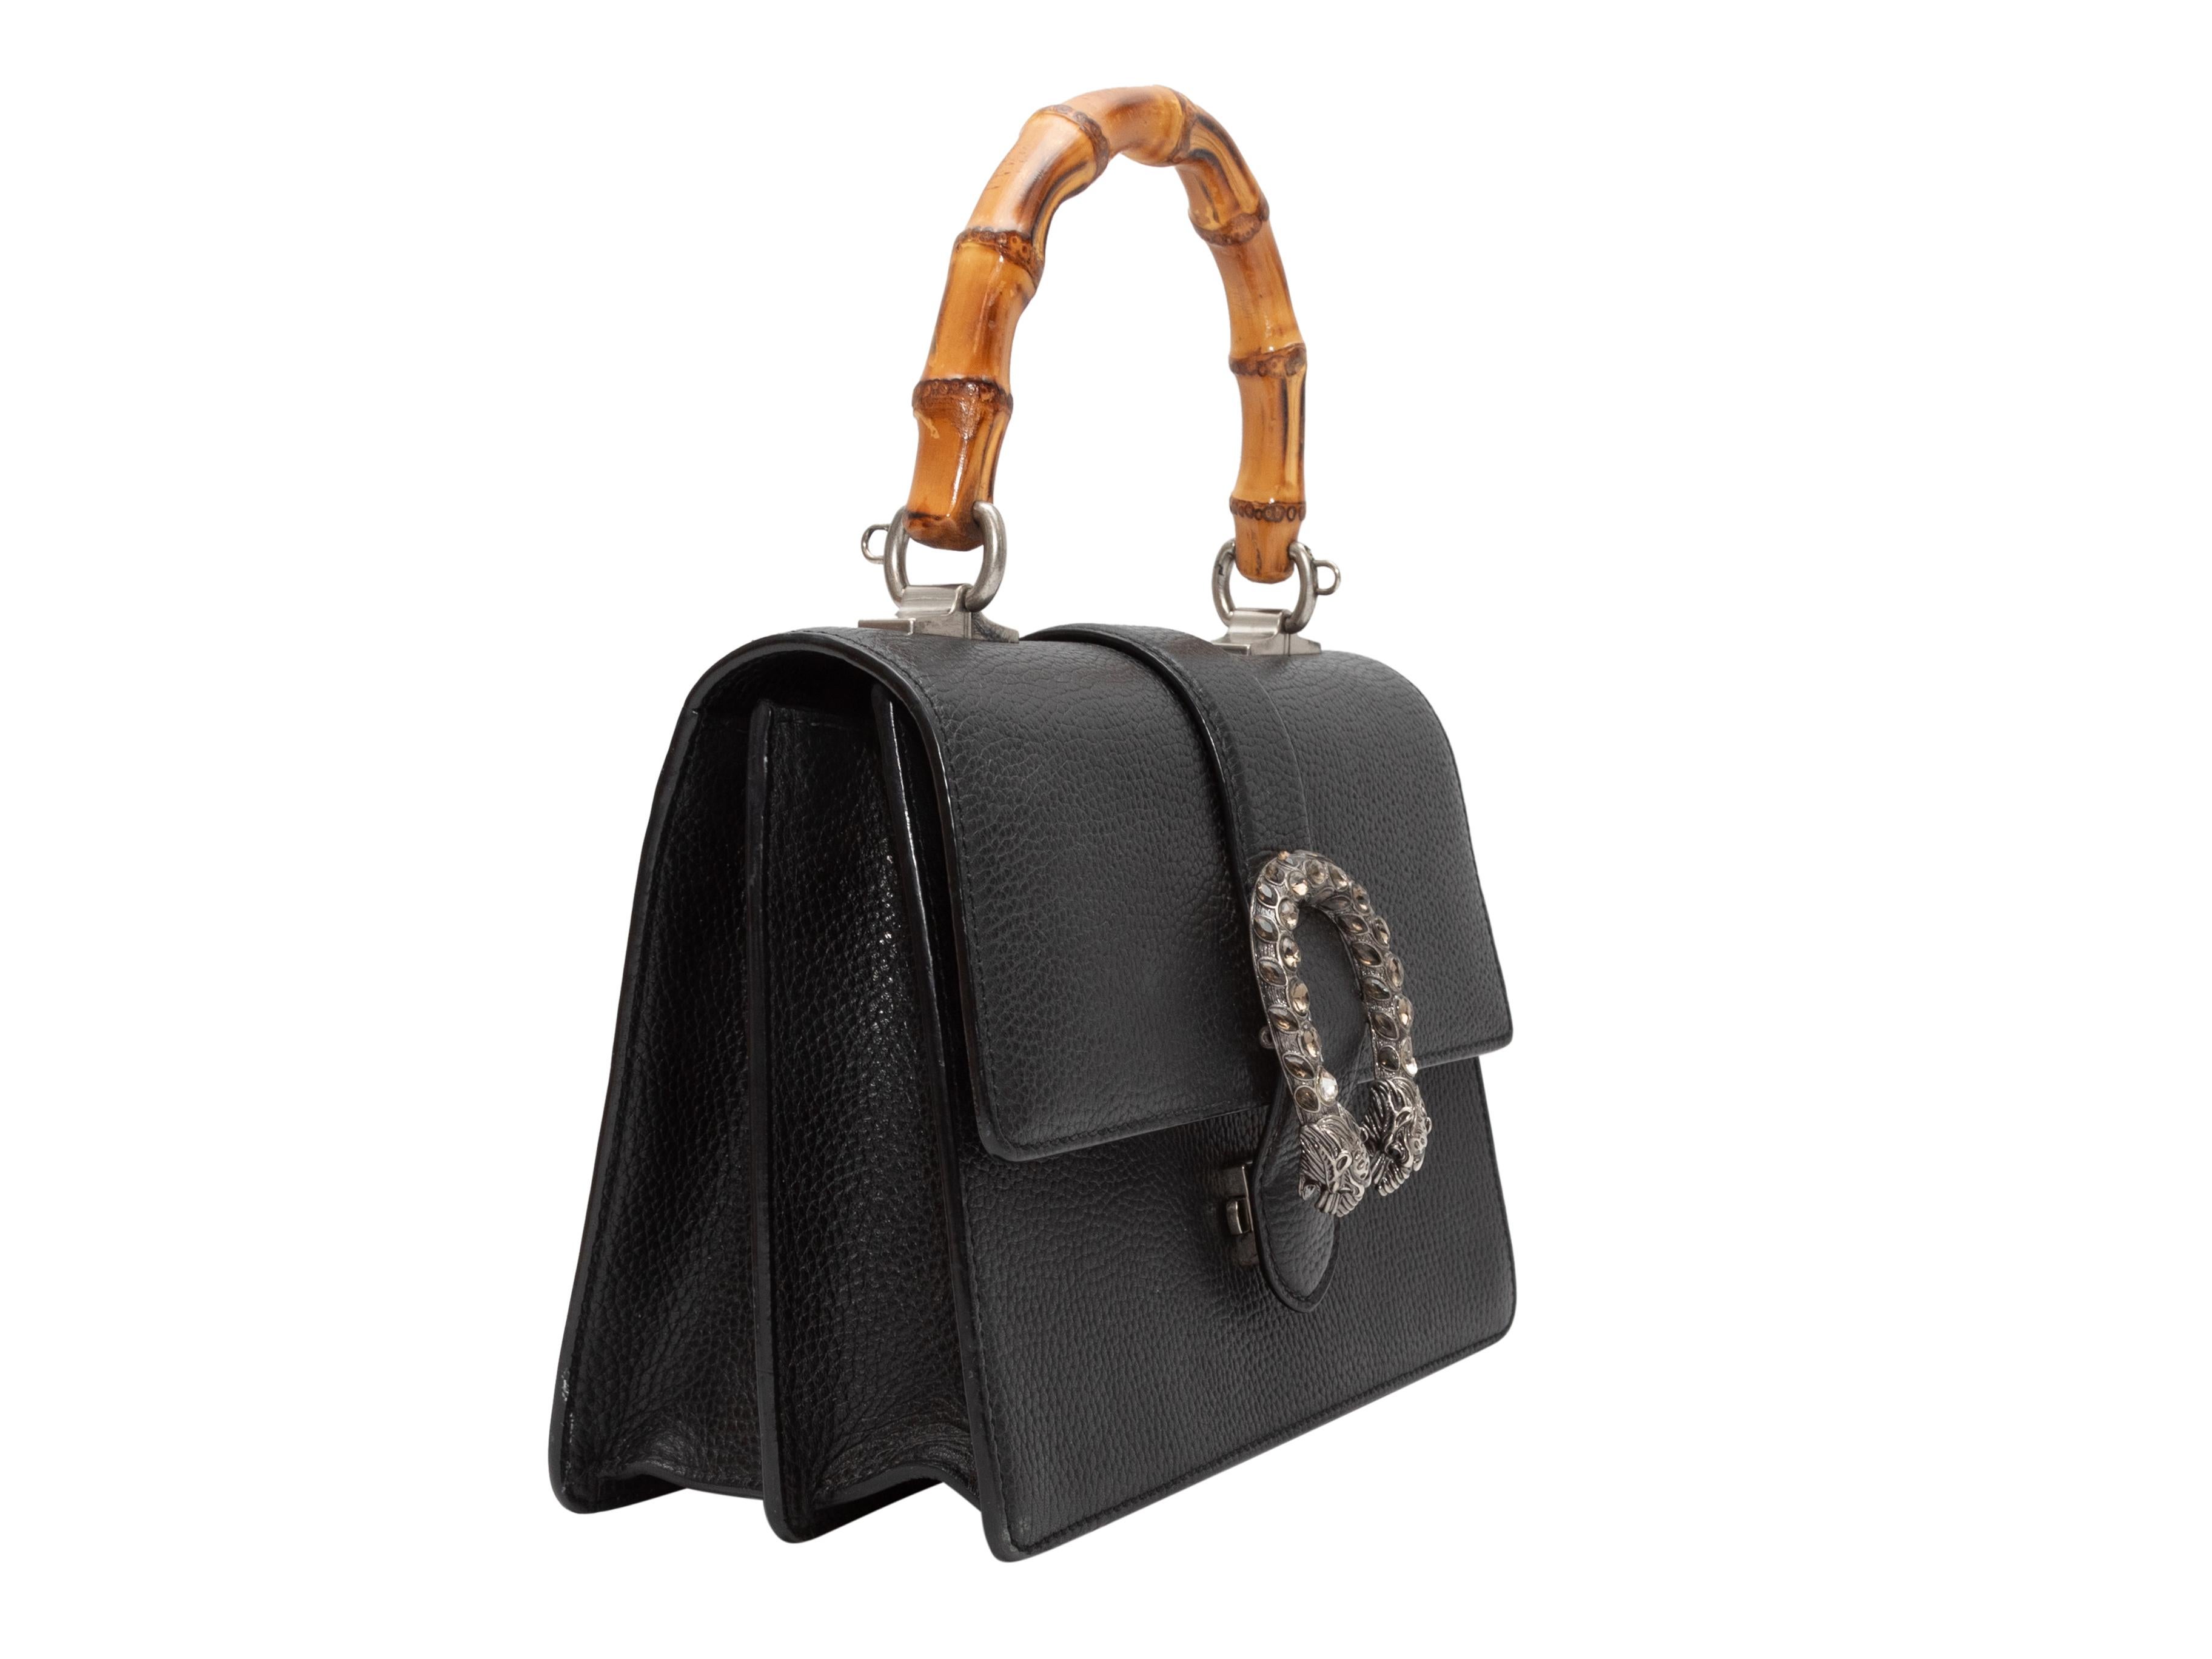 Black Gucci Medium Dionysus Bamboo Top Handle Bag. This bag features a leather body, silver-tone hardware, a single bamboo top handle, and a front flap closure. 9.3